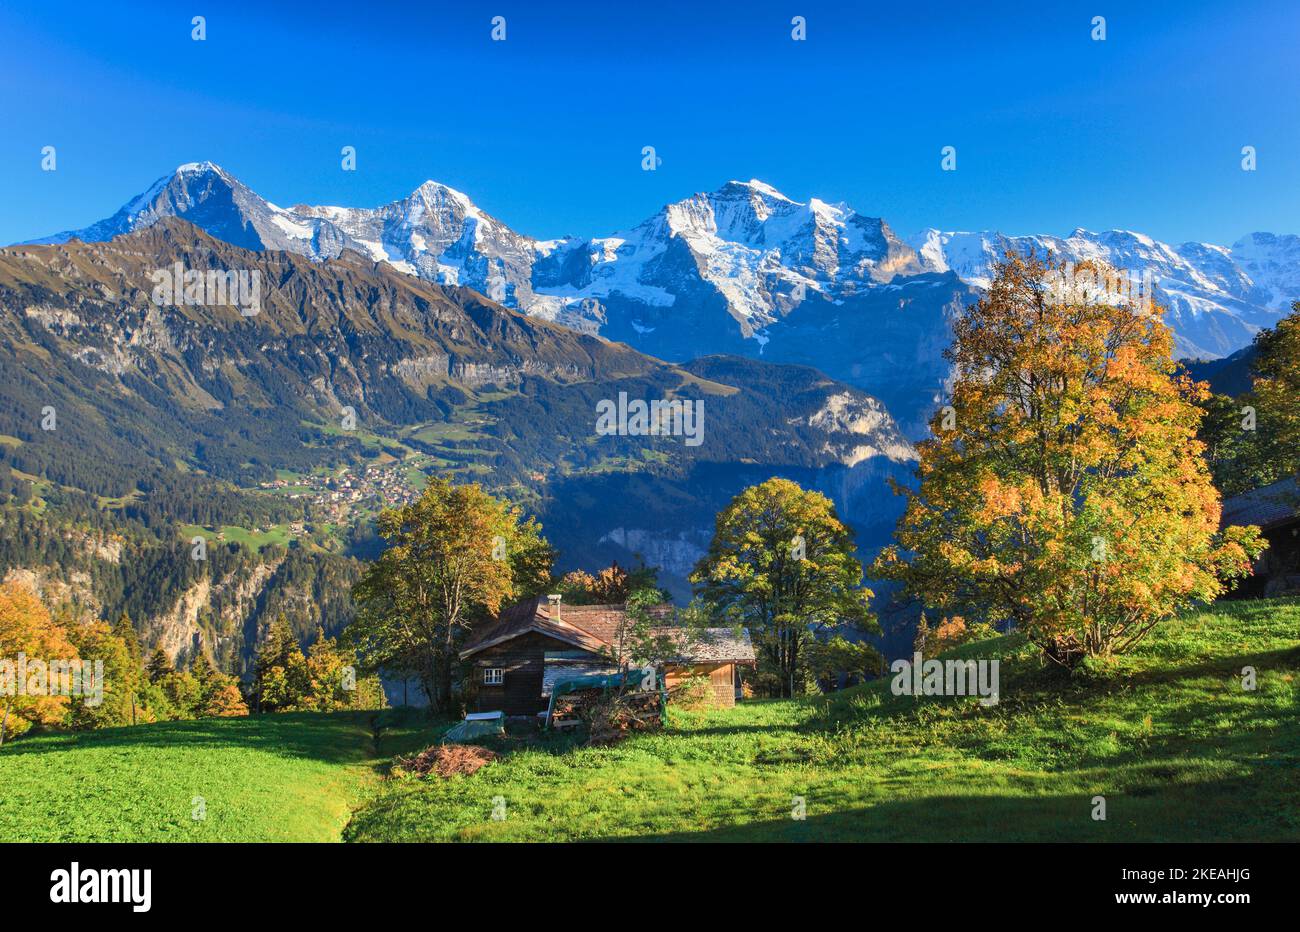 view from Sulwald, Eiger - 3970 m, Moench - 4107 m, Jungfrau - 4158 m, Switzerland, Bernese Oberland Stock Photo